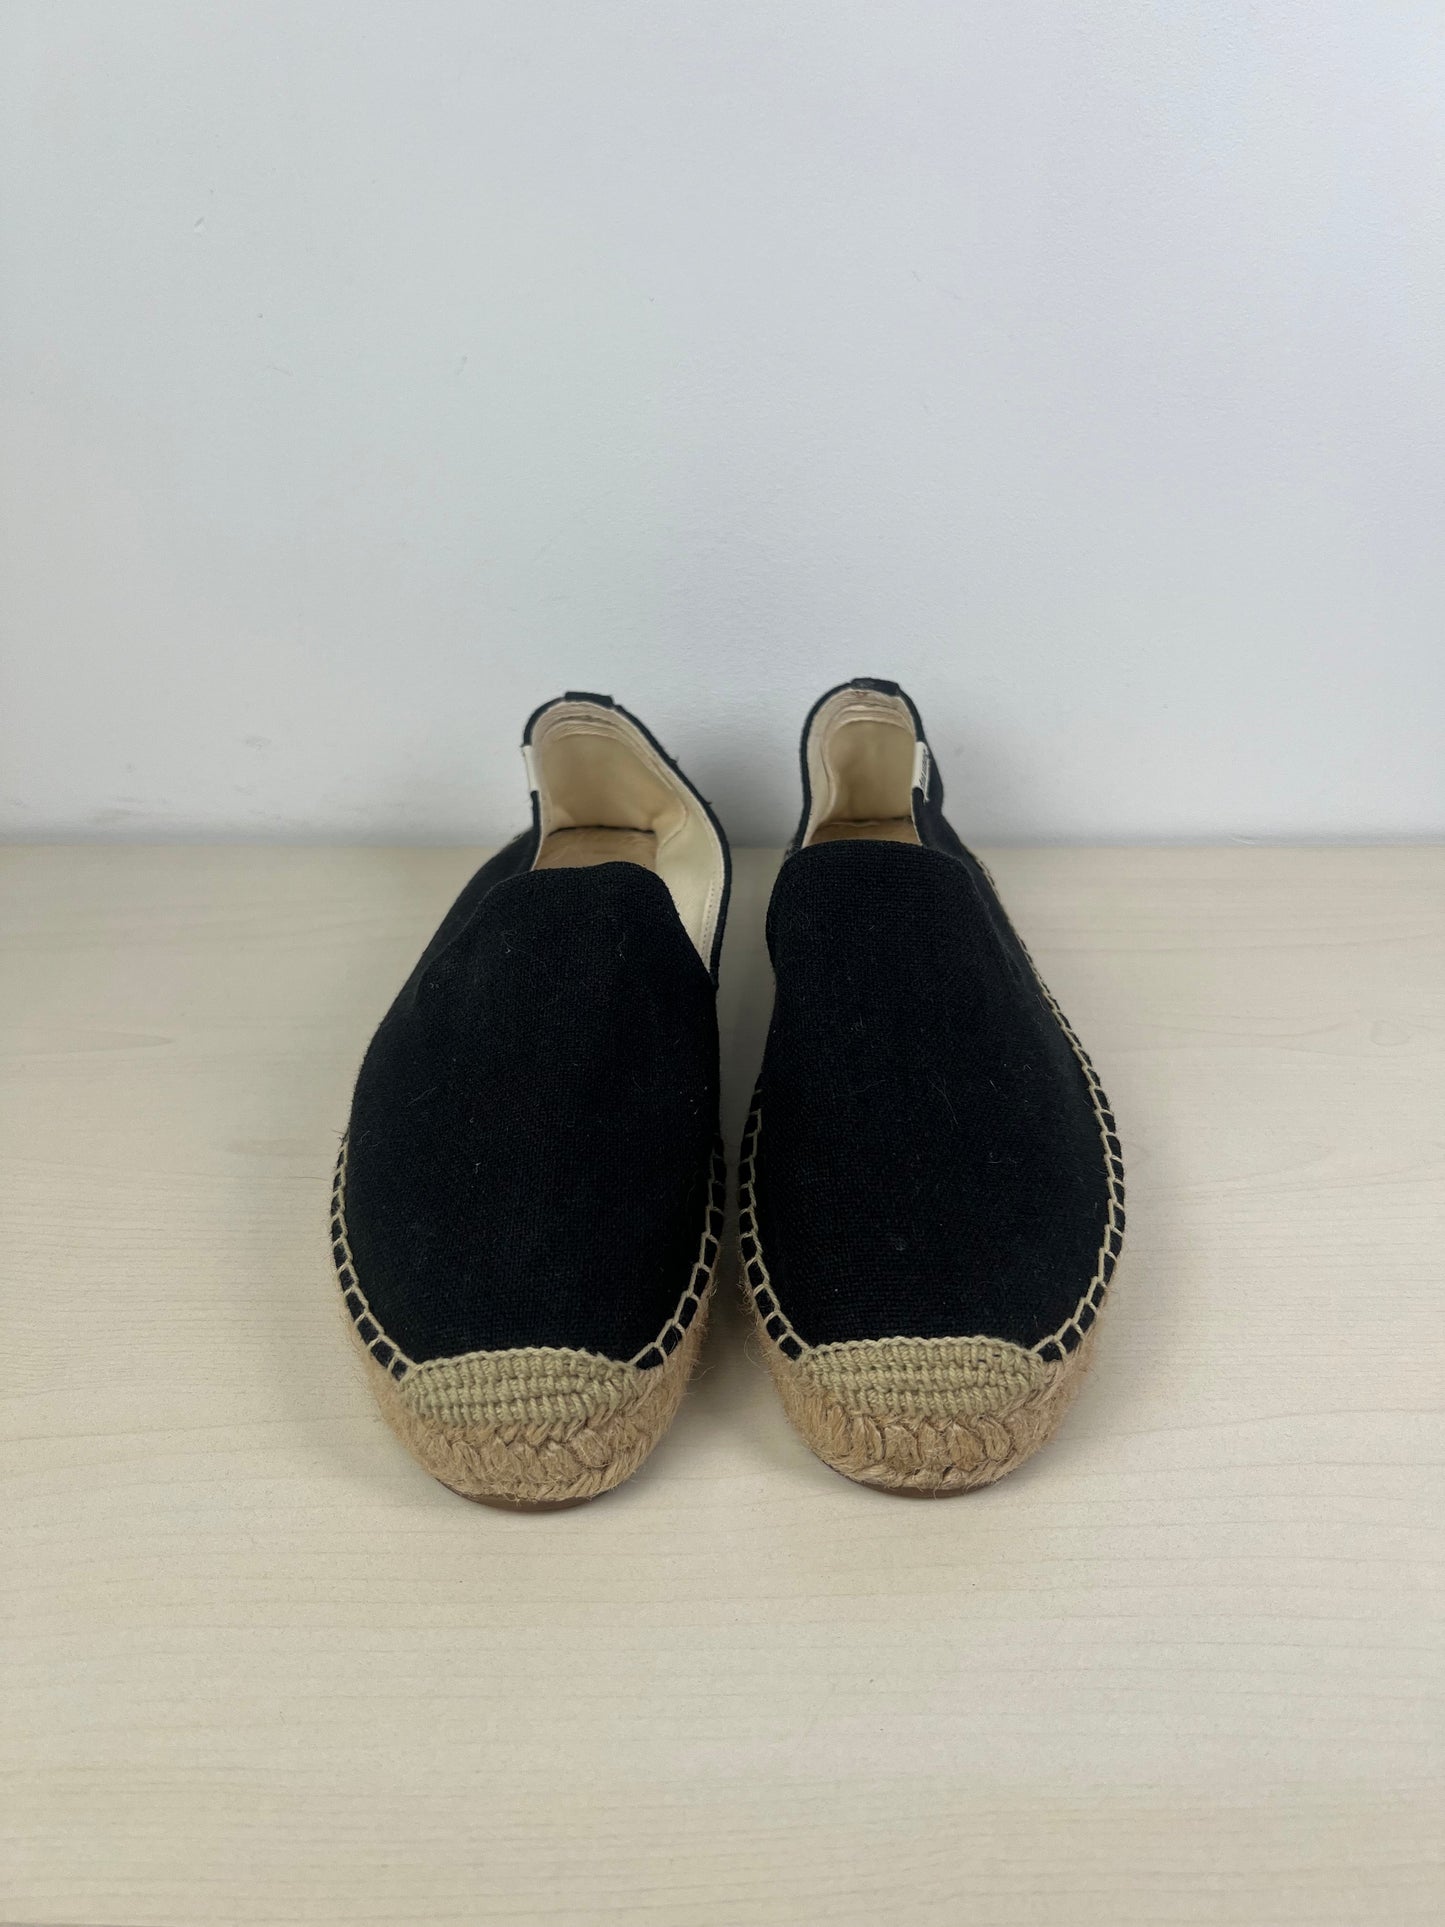 Black & Brown Shoes Flats Soludos, Size 11